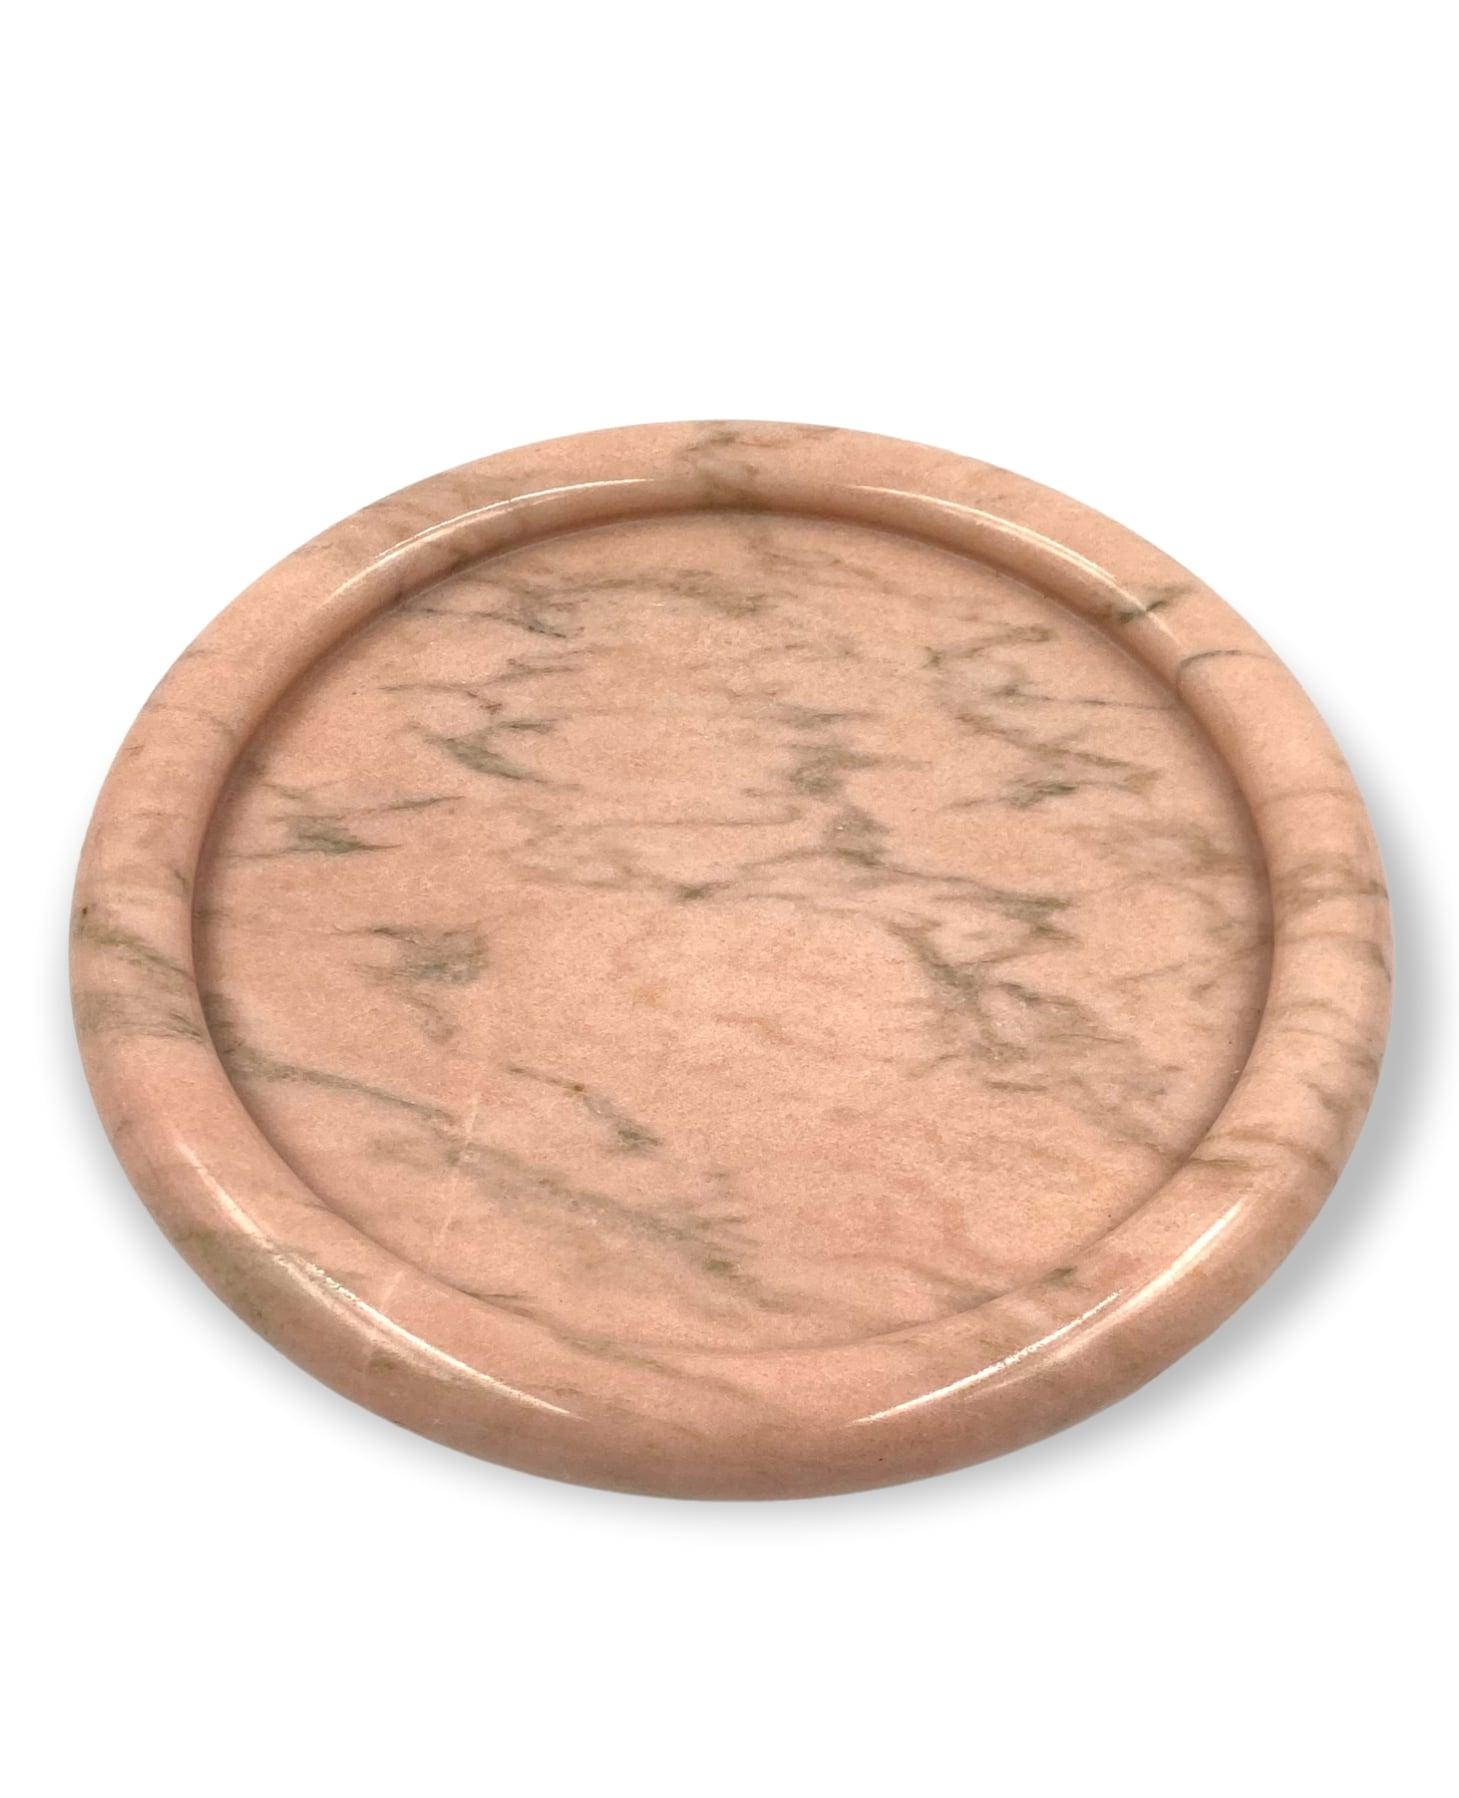 Sergio Asti, Pink Portuguese Marble Centerpiece / Tray, Up&Up Italy, 1970s For Sale 6